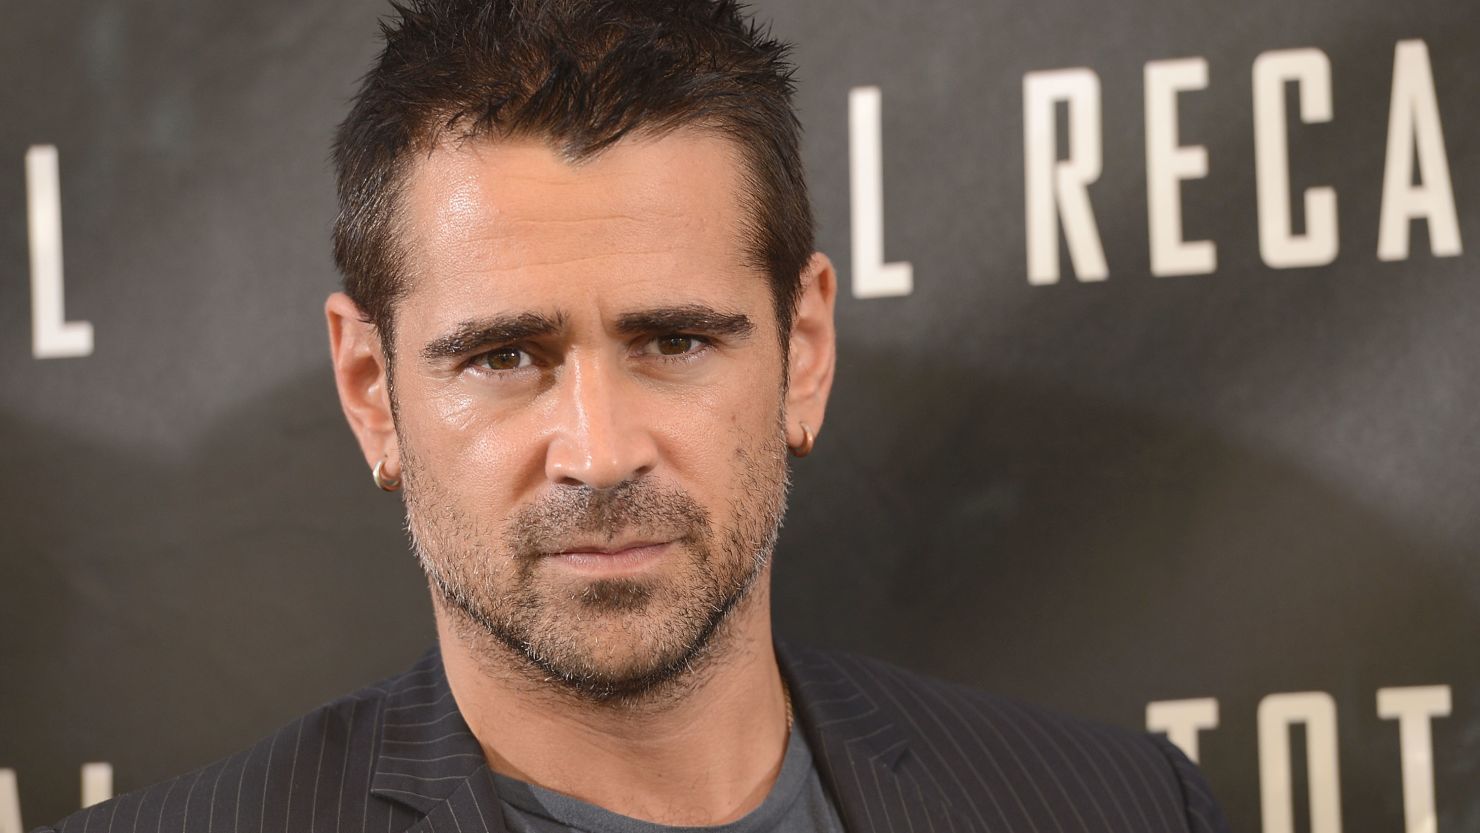 Colin Farrell is the latest addition to the cast of "Fantastic Beasts and Where to Find Them."